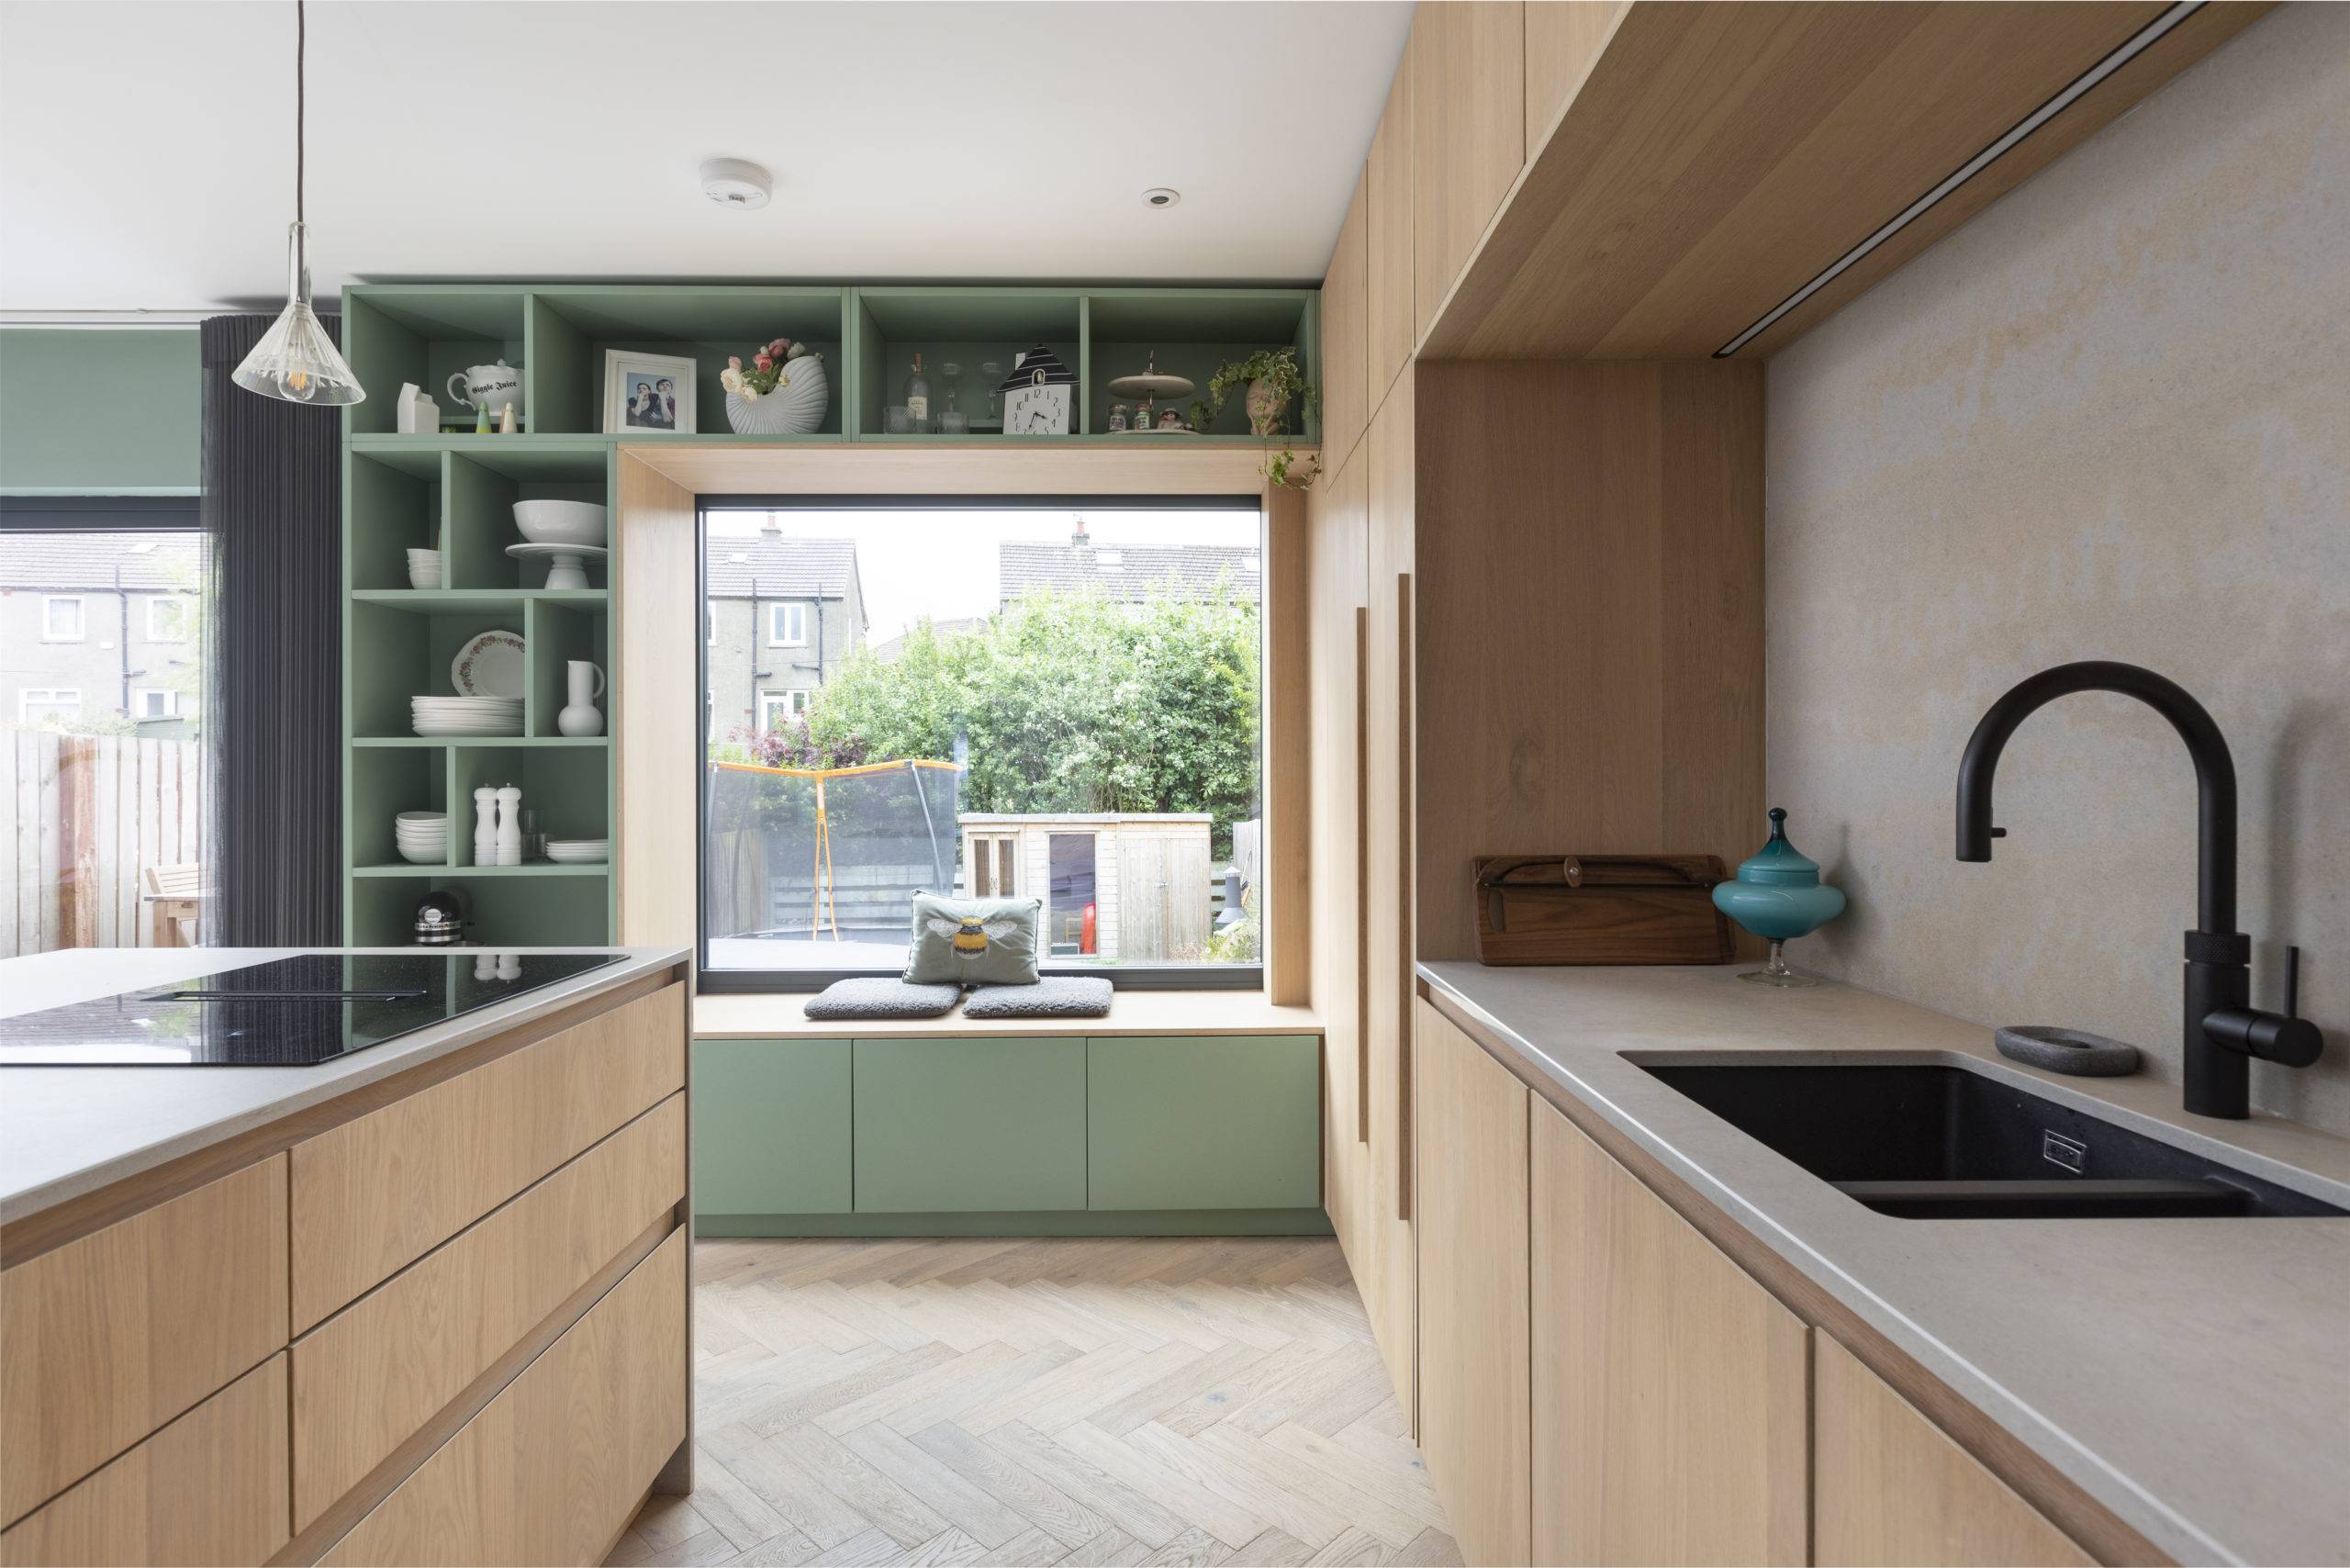 green custom shelving built in around large window seat in kitchen with large oak doors and black sink in alcove